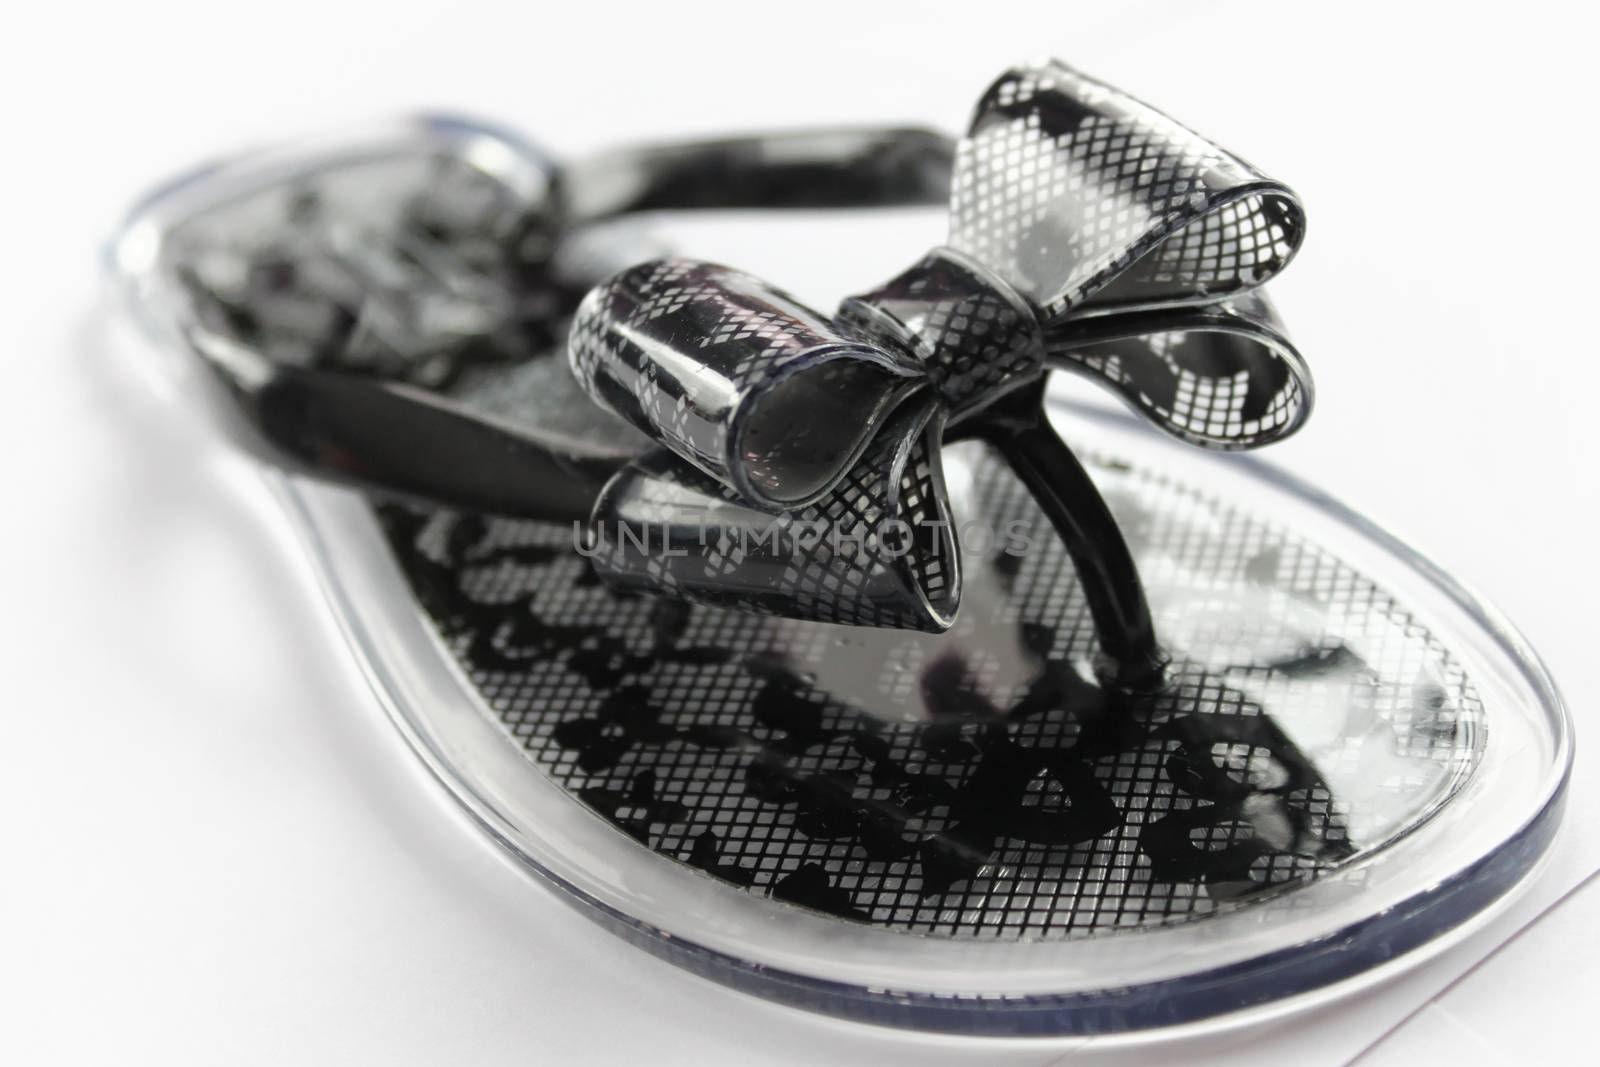 Transparent flip flops with black flowers, on the white background by Kasia_Lawrynowicz